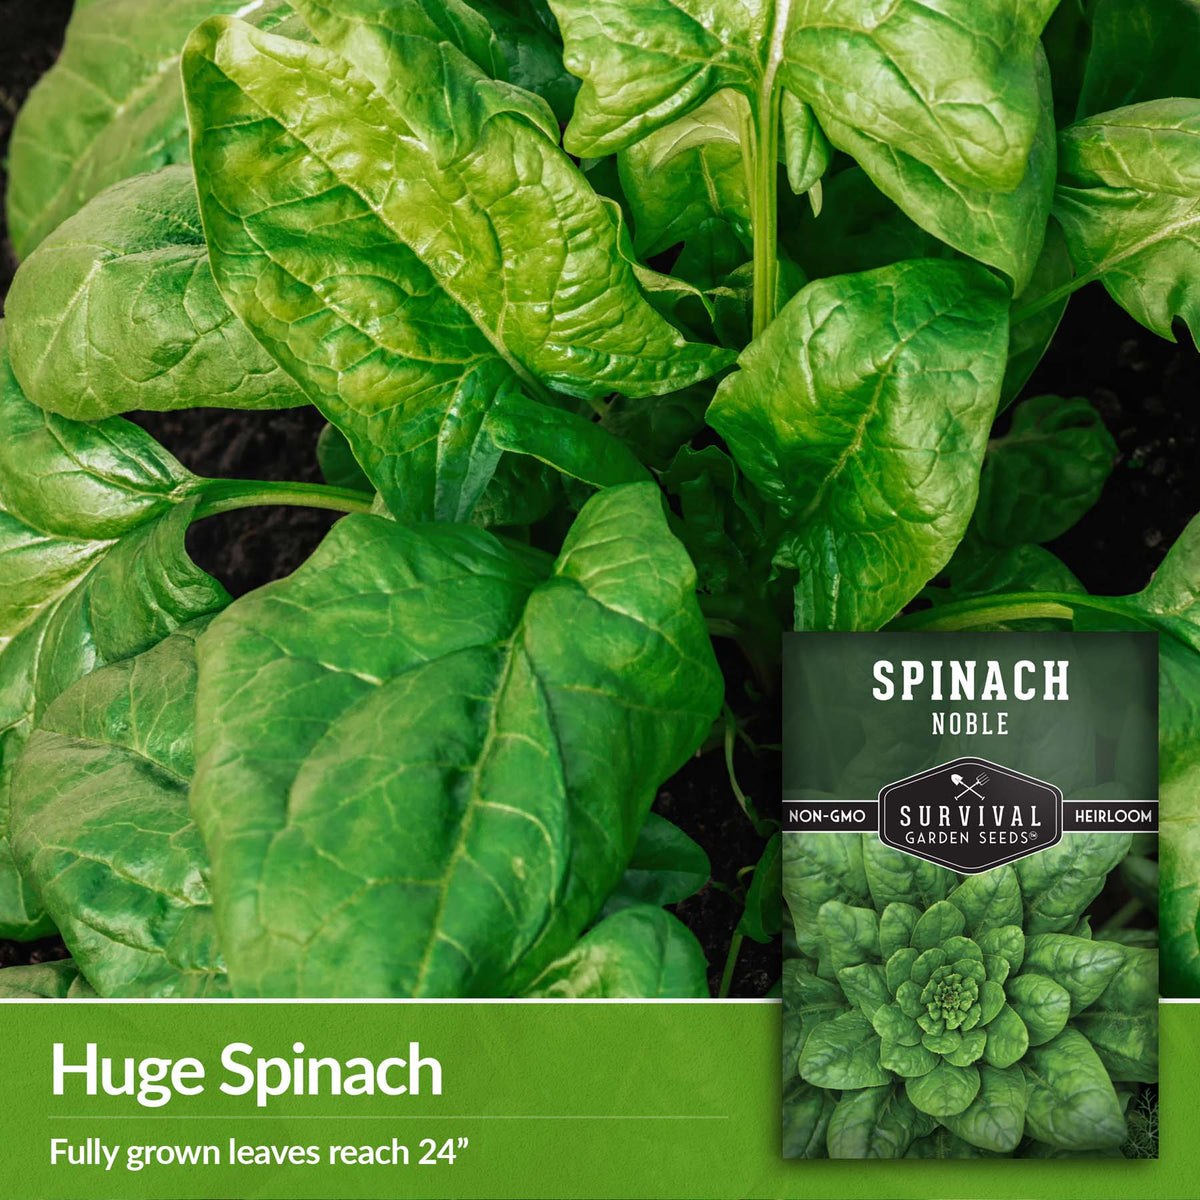 Noble Giant Spinach produces huge 24&quot; leaves